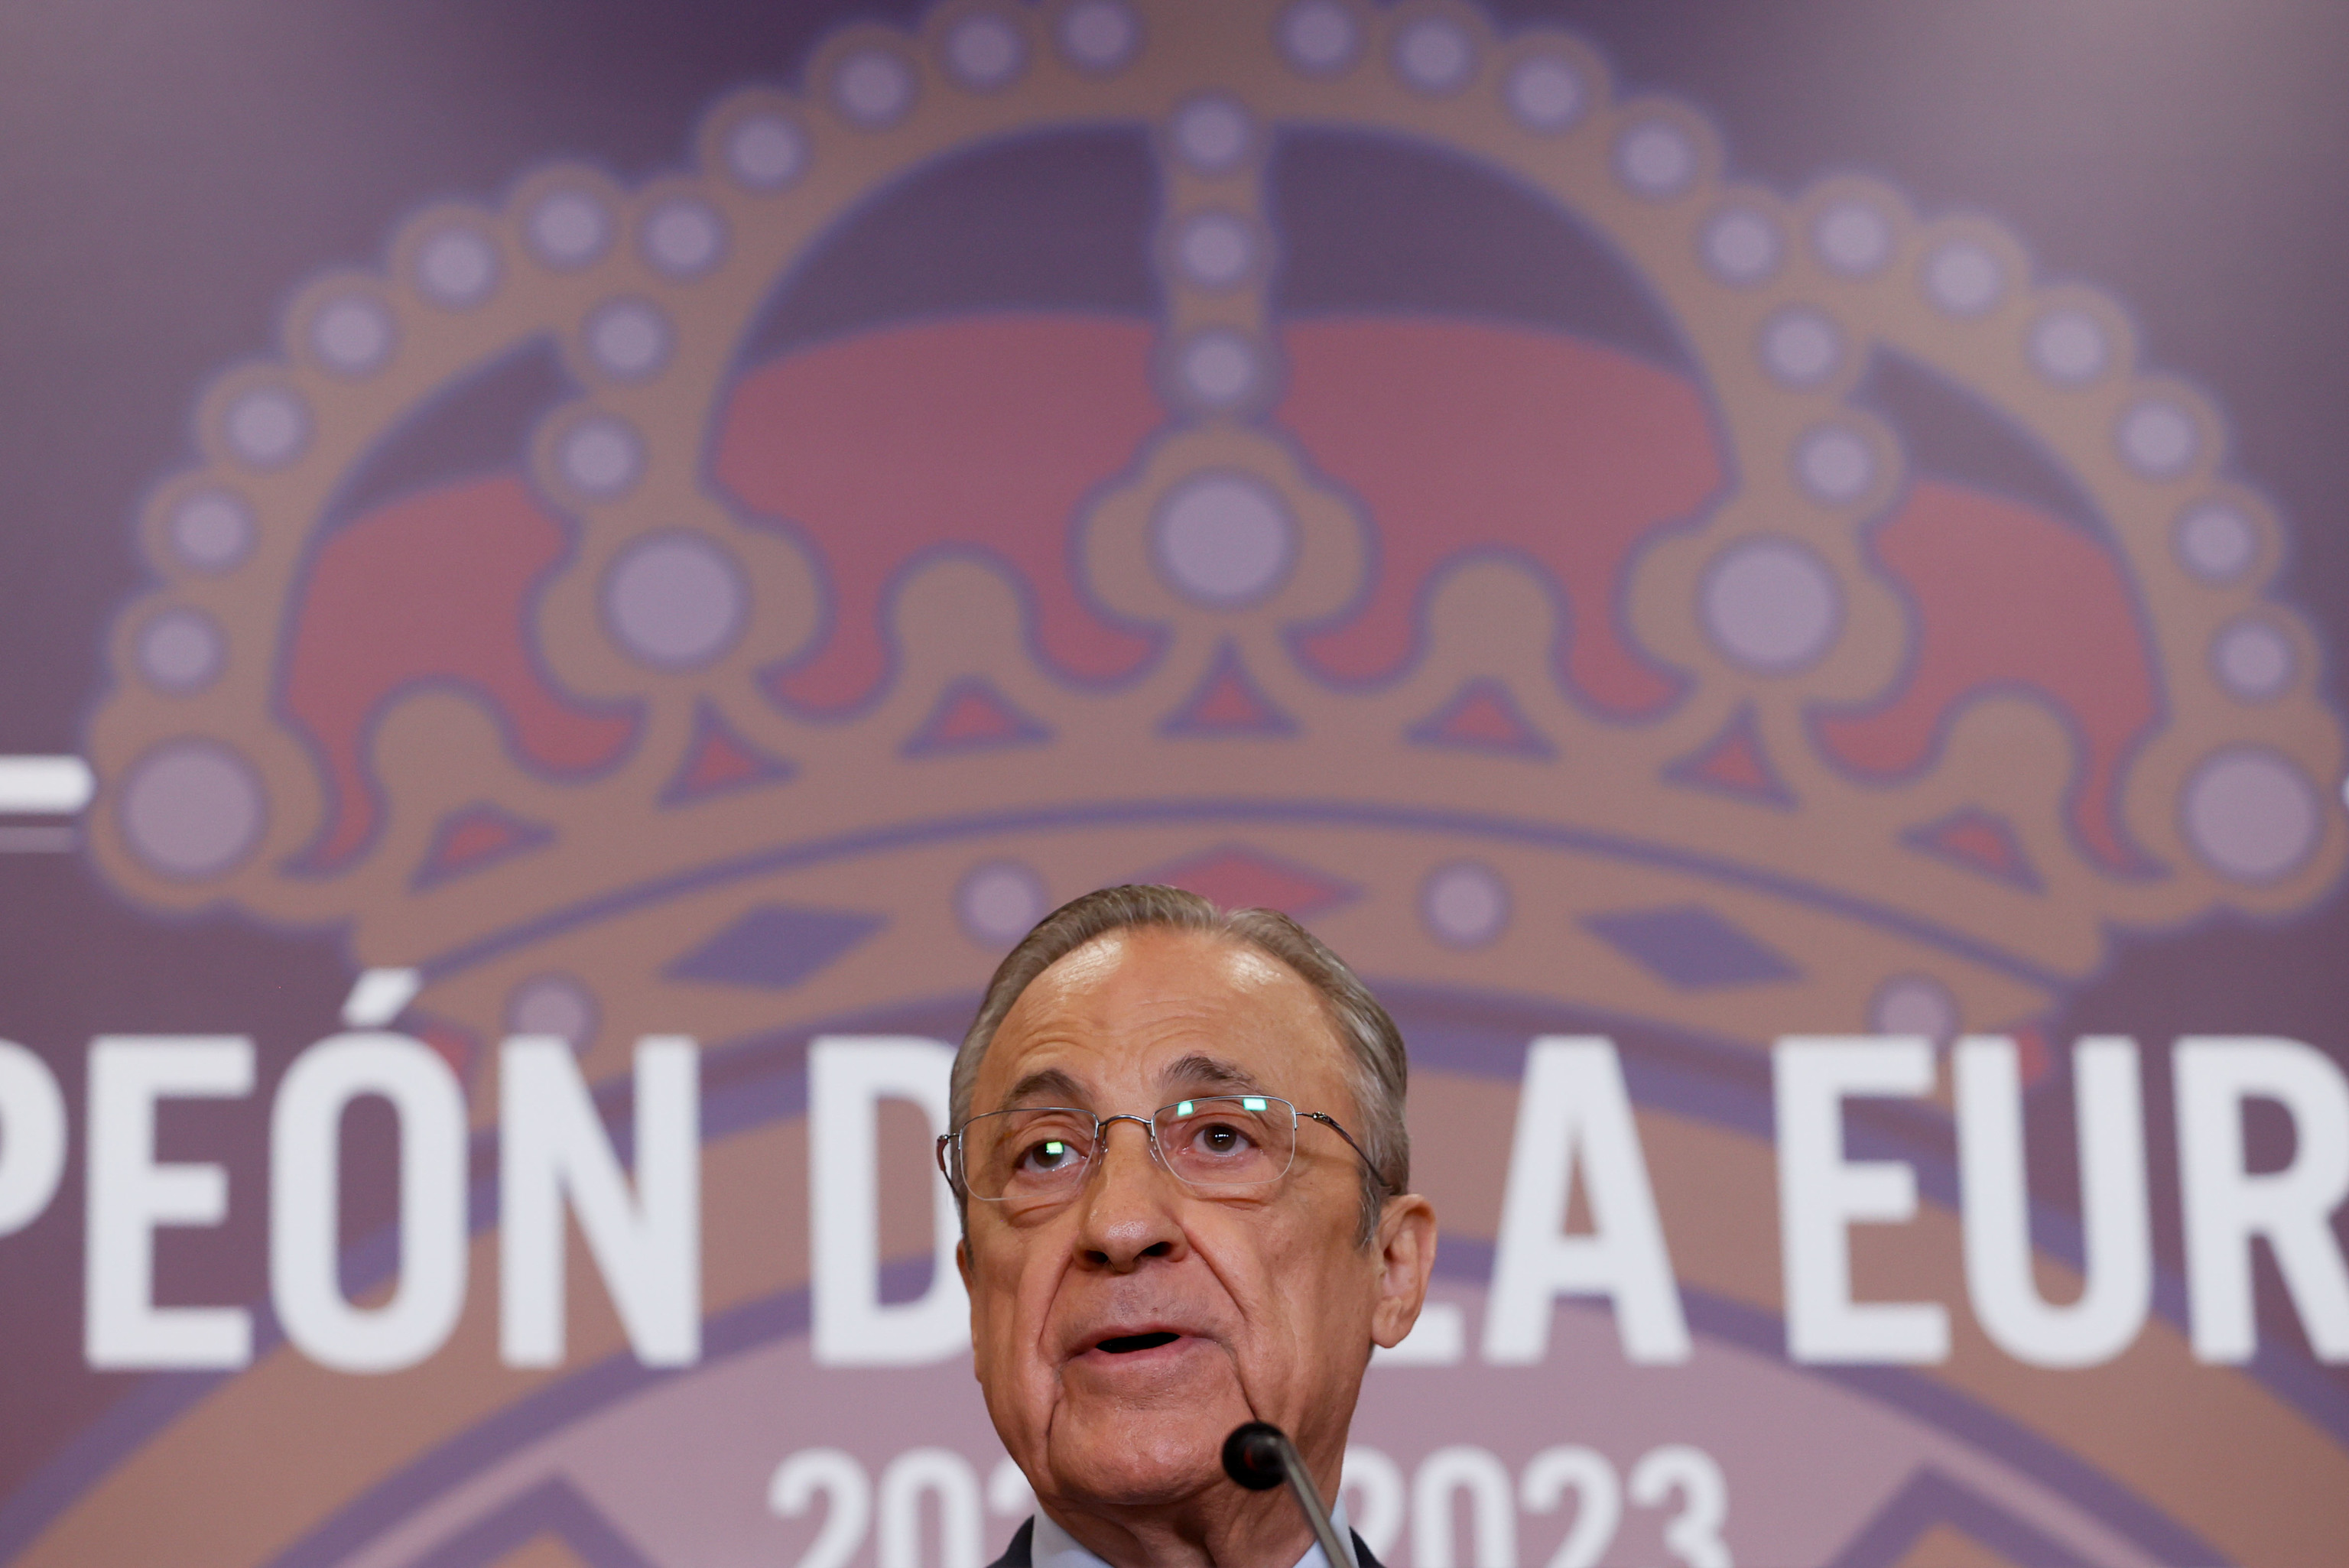 The president of Real Madrid, Florentino P.